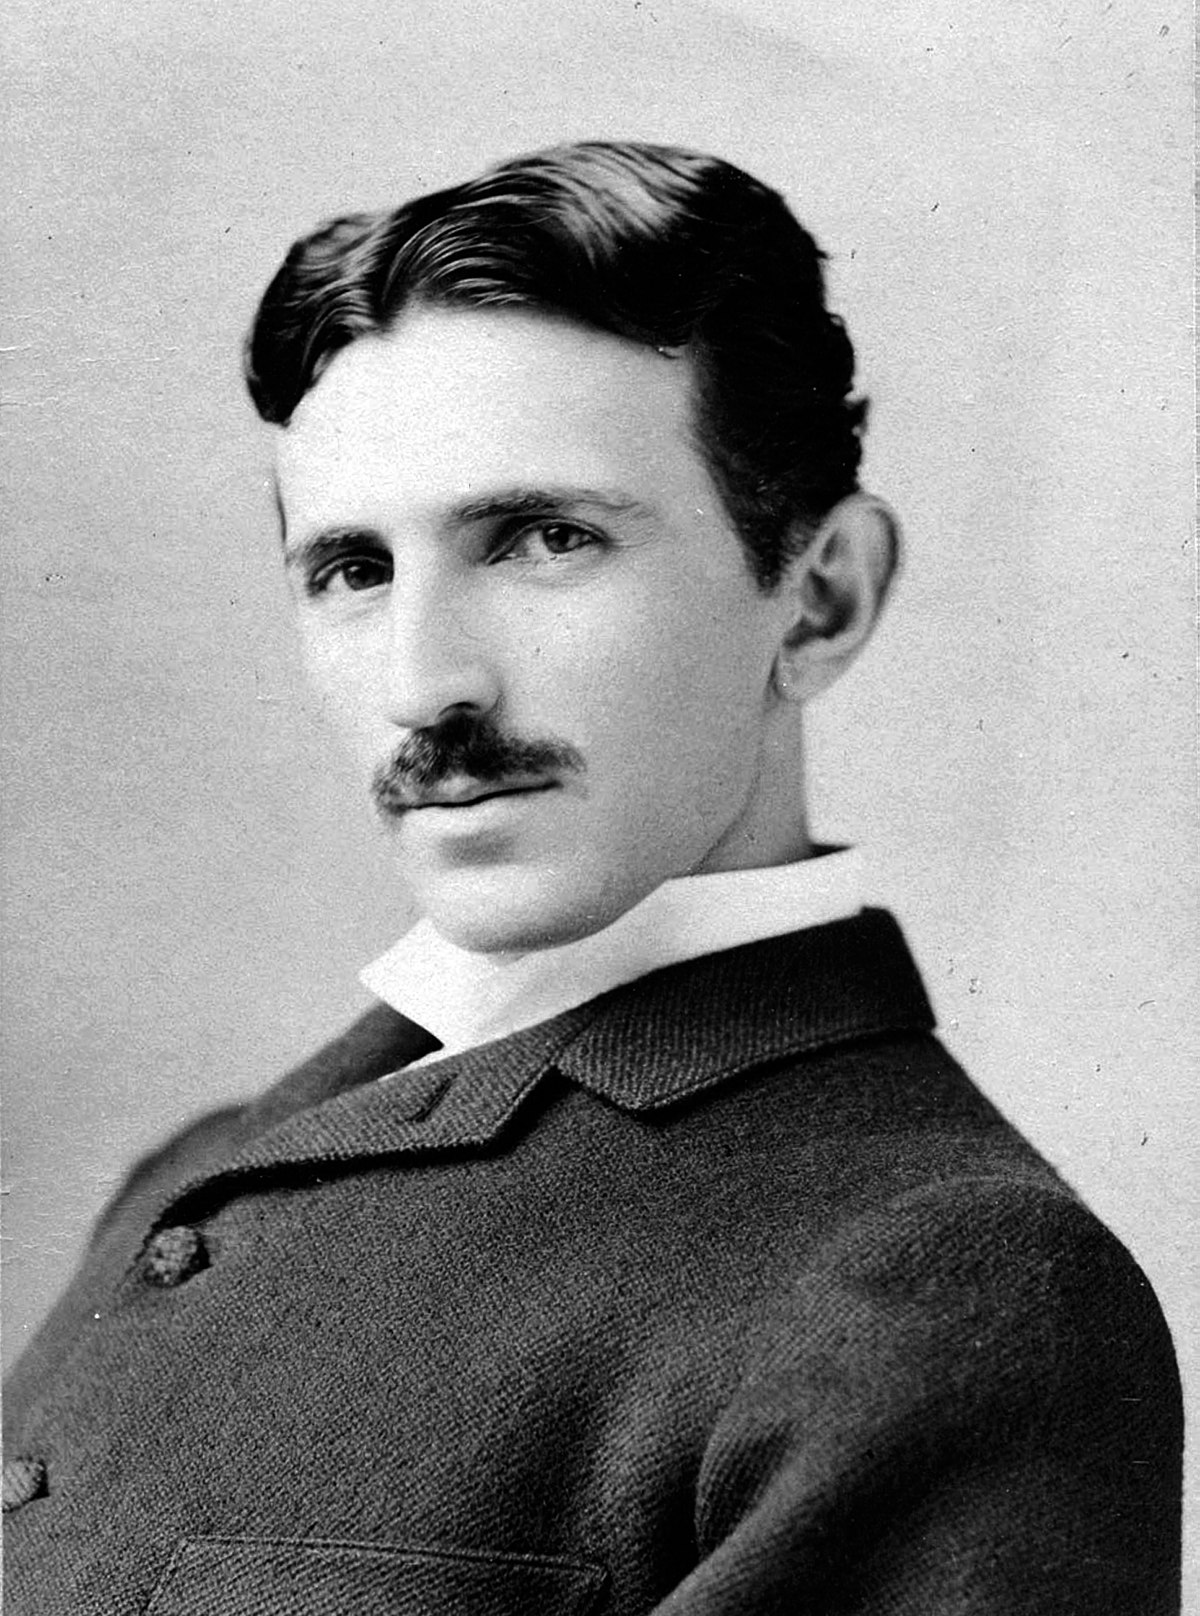 165 Years of Nikola Tesla; His Truths, Mysteries, Secrets and Inventions